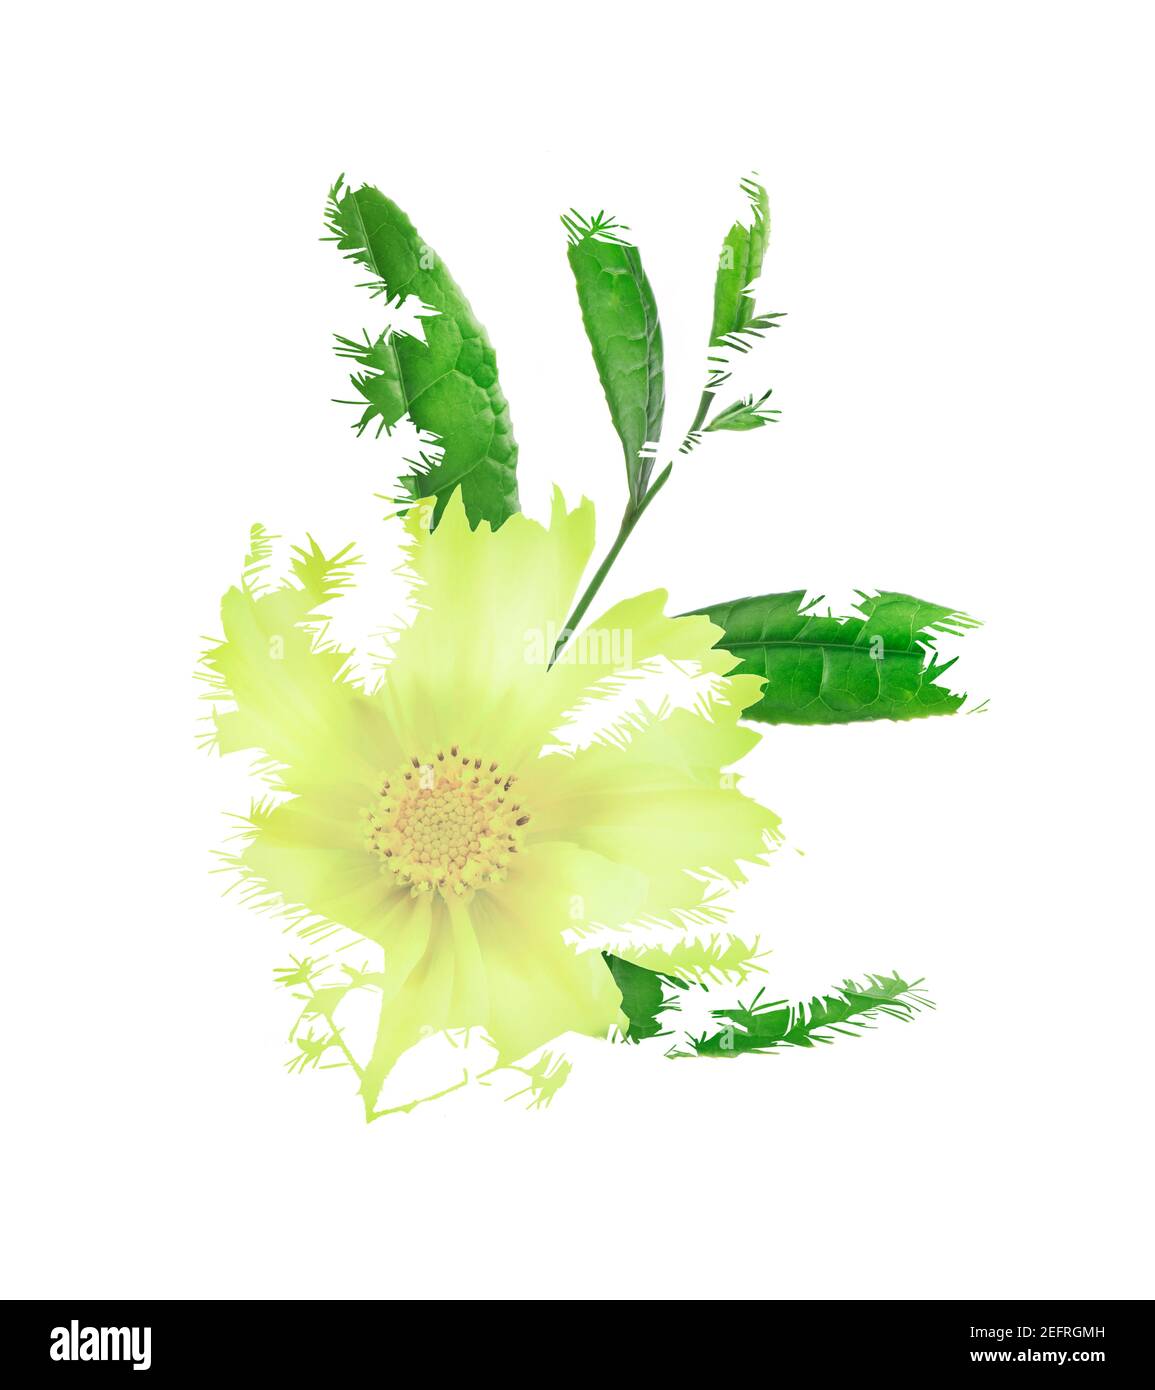 Abstract floral composition of yellow Cosmos flower and green plant leaves isolated on white background. Artistic nature double exposure image. Stock Photo